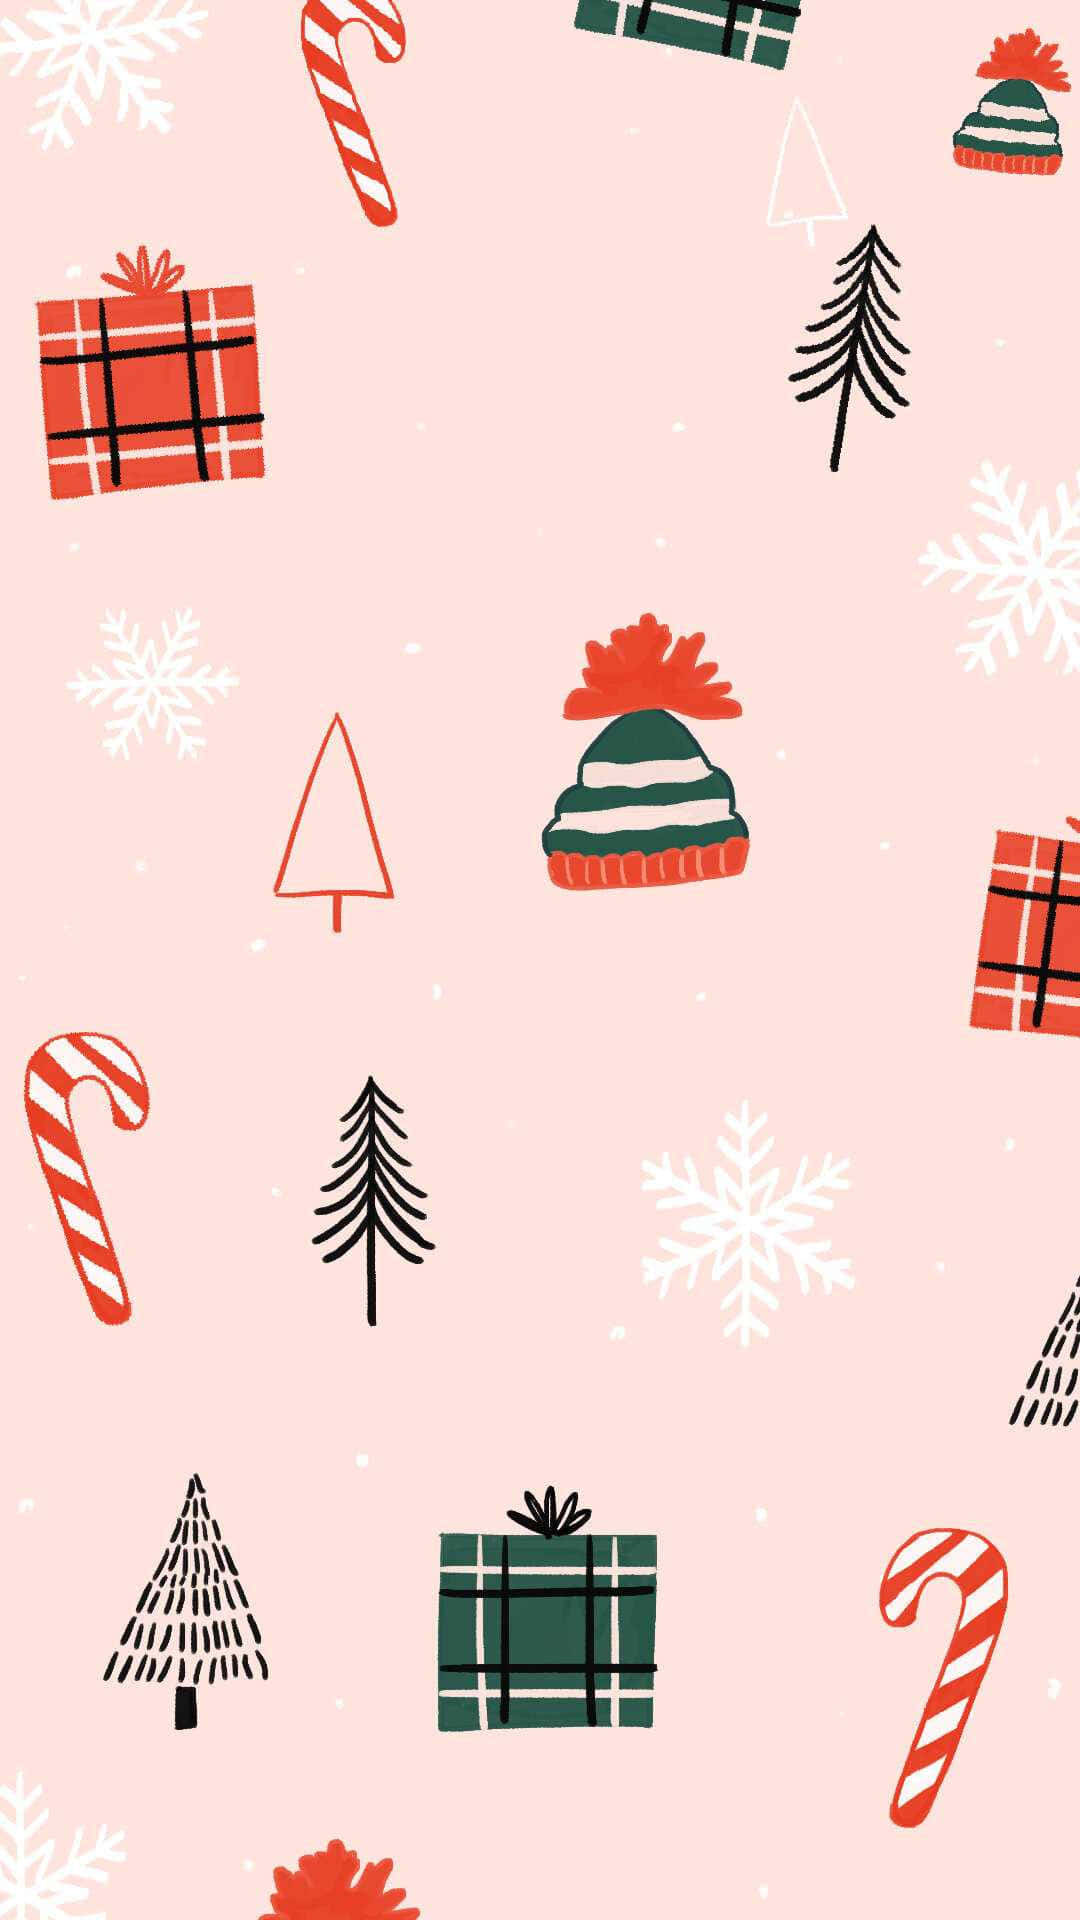 A Fun&Festive Christmas with a Simple Twist! Wallpaper